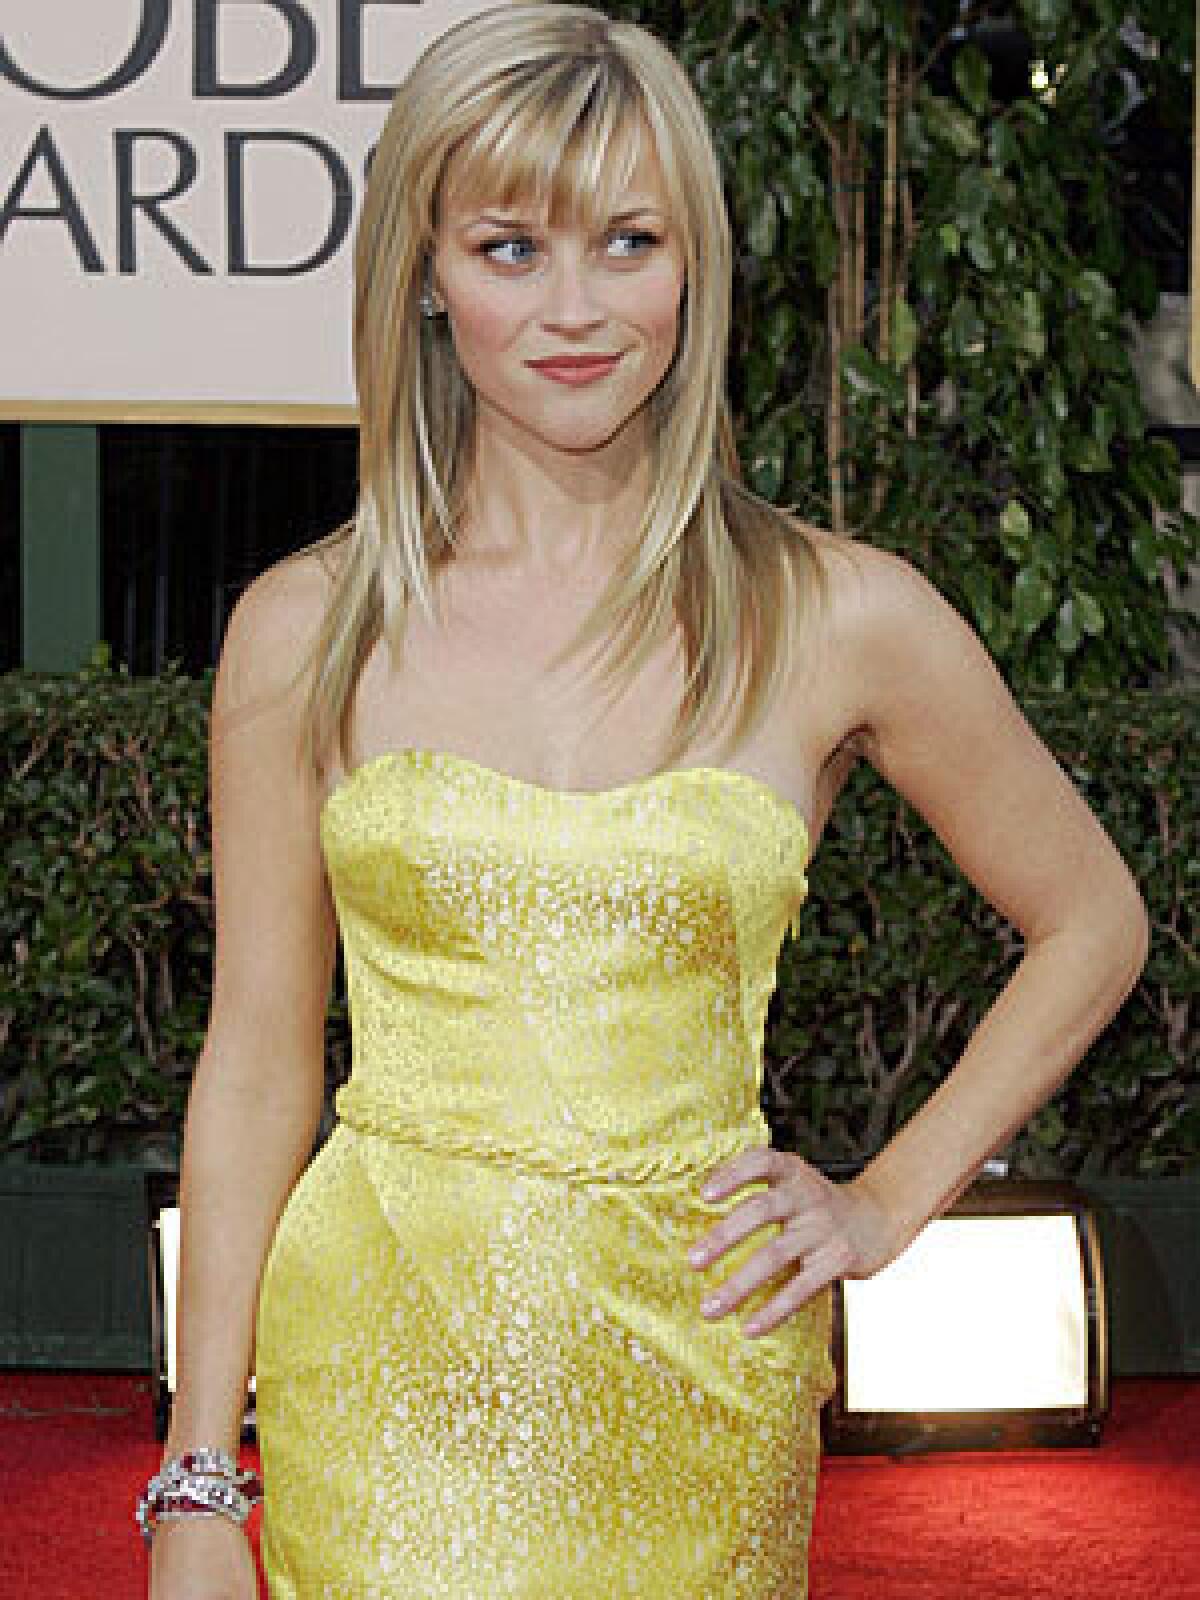 Reese Witherspoons gem-free neck from 07 looks oh-so-2009.